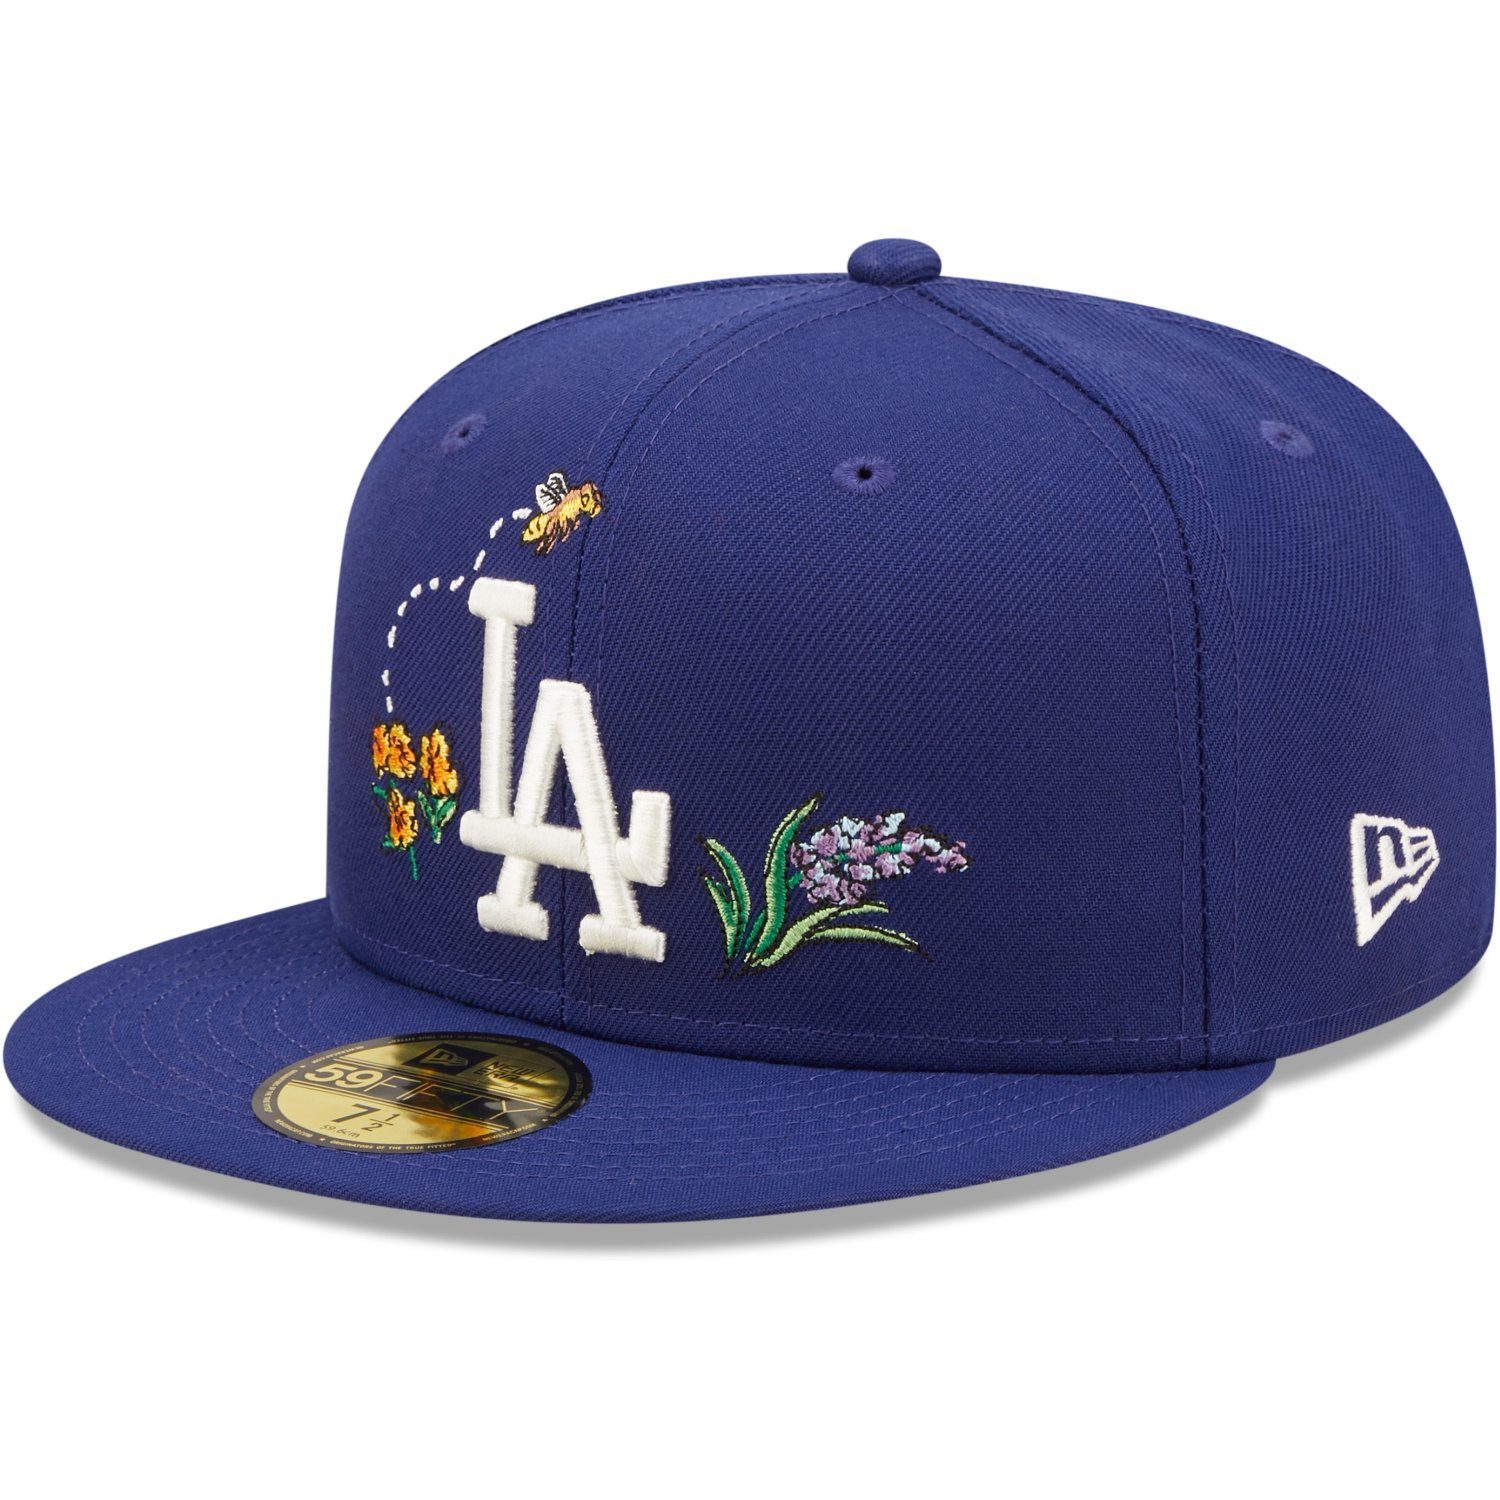 New Era Fitted Cap 59Fifty WATER FLORAL Los Angeles Dodgers